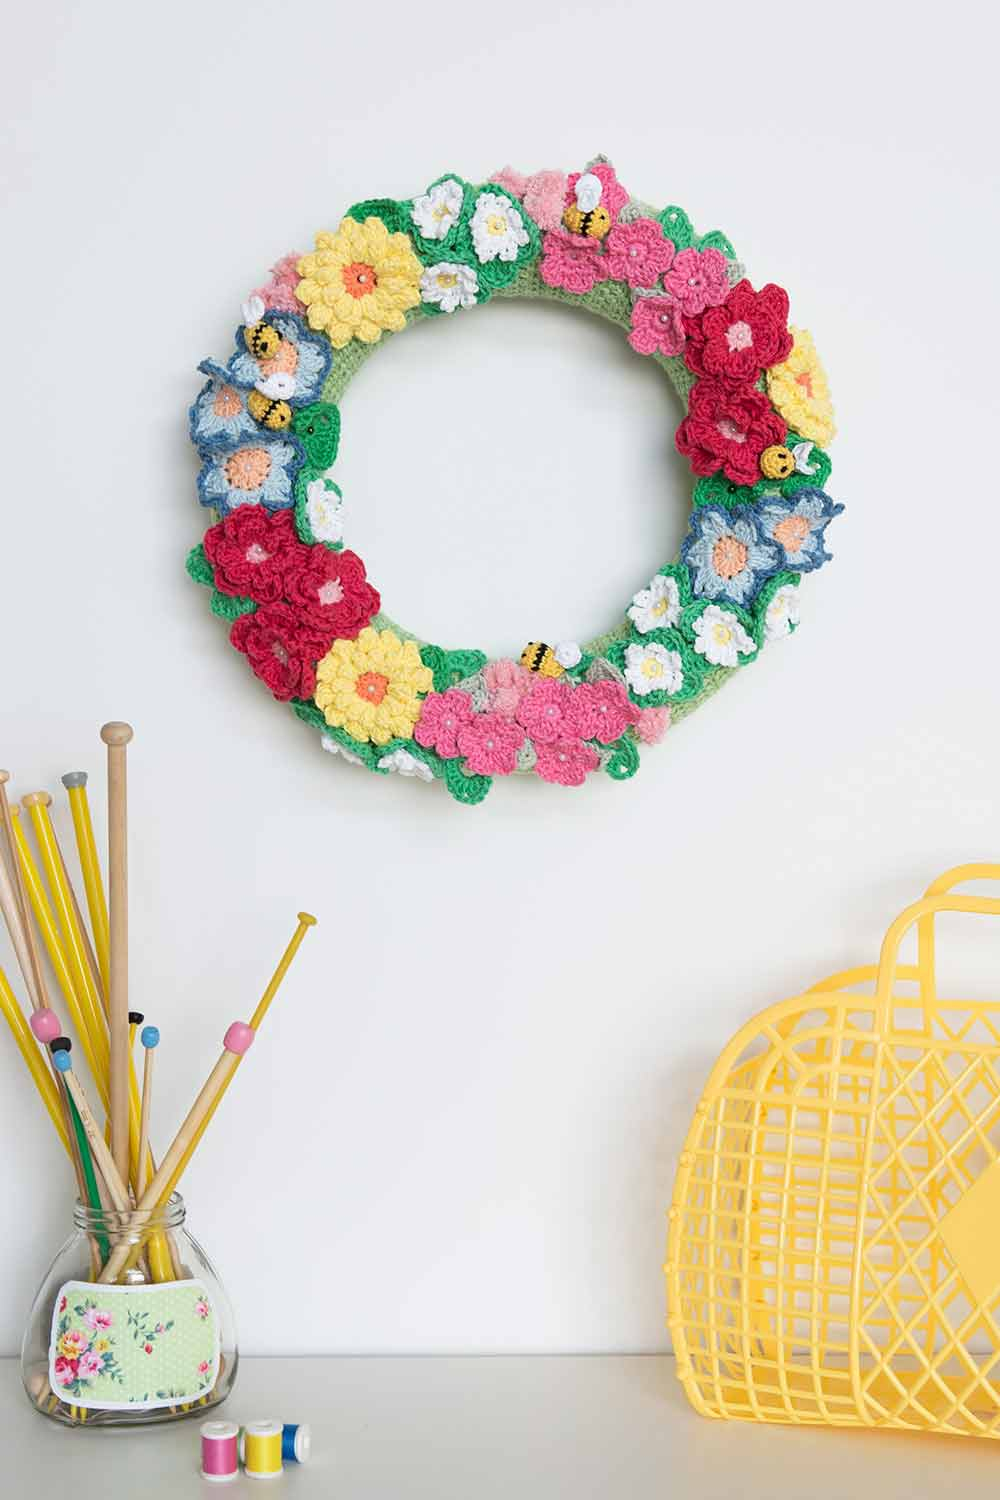 Crochet With Embroidery Floss Patterns 40 Crochet Flower Patterns And What To Do With Them Mollie Makes